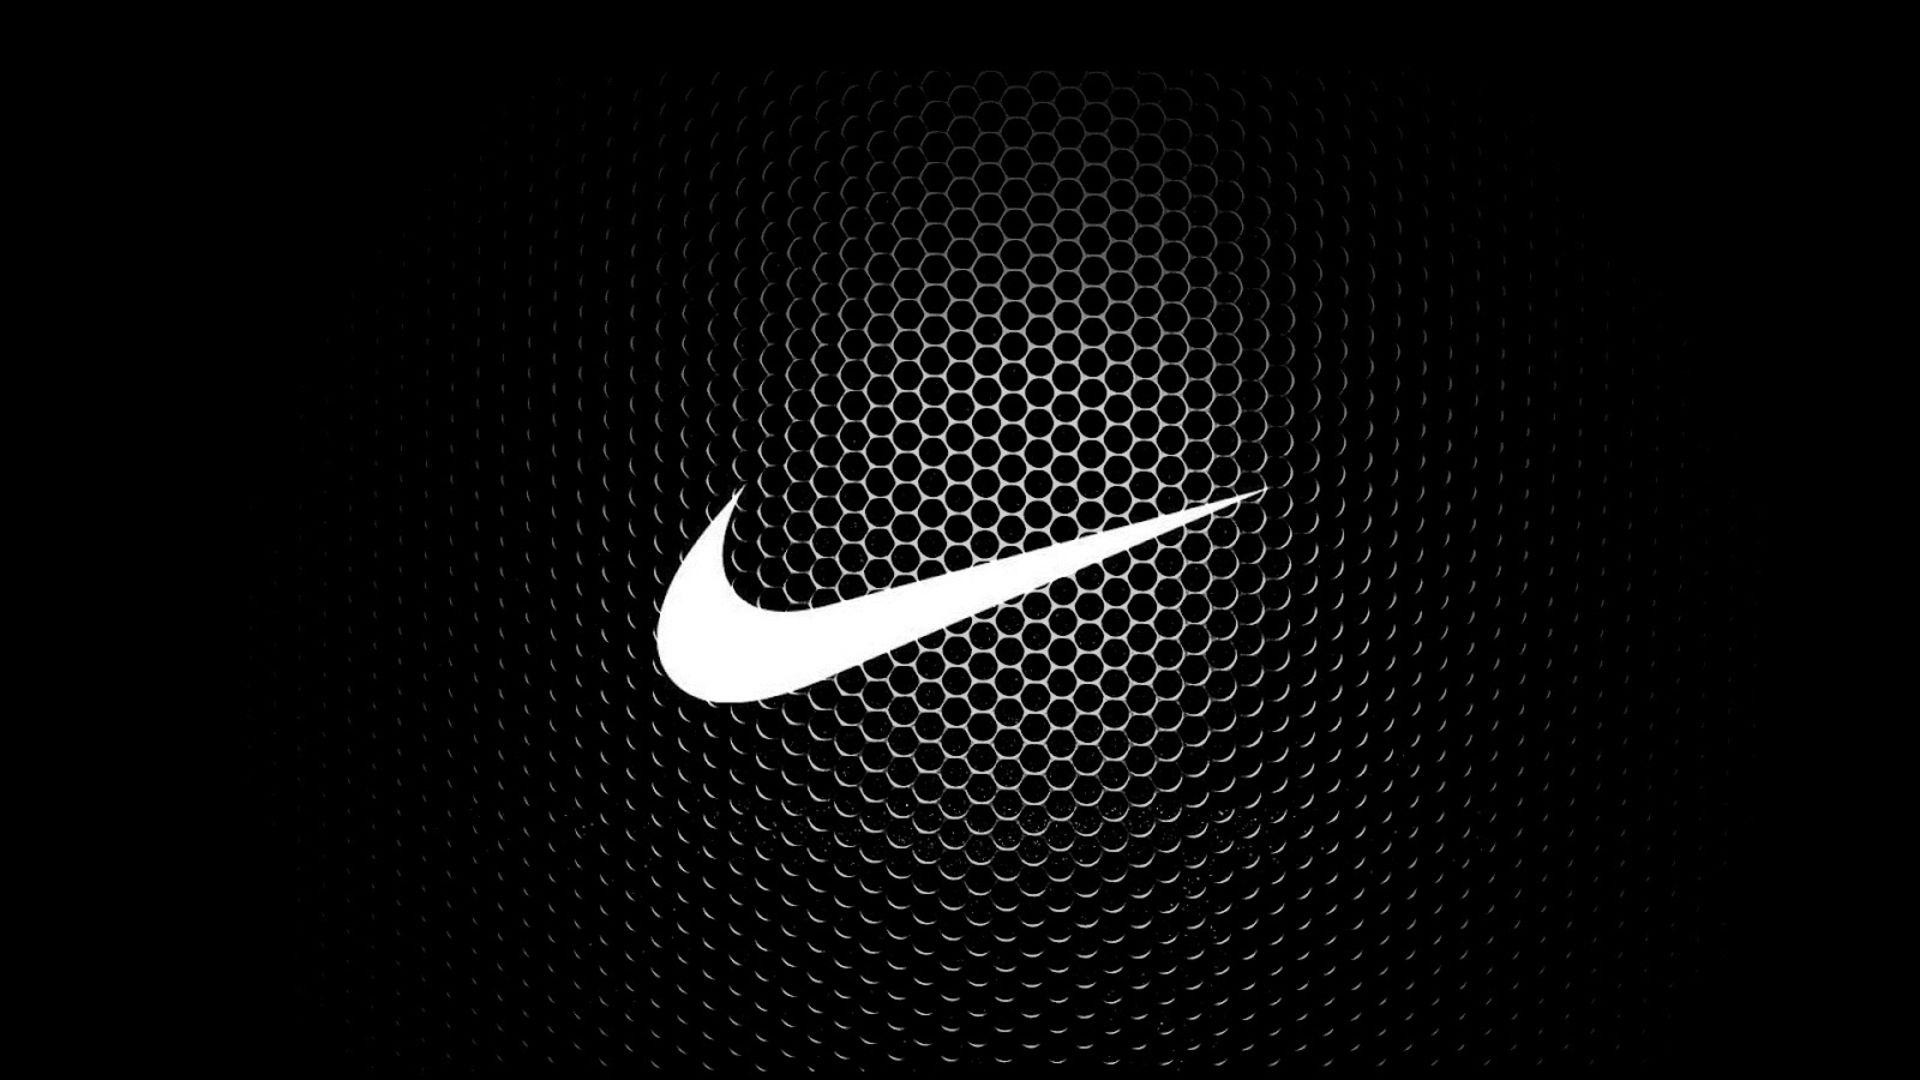 Nike Wallpapers 2018 66 images